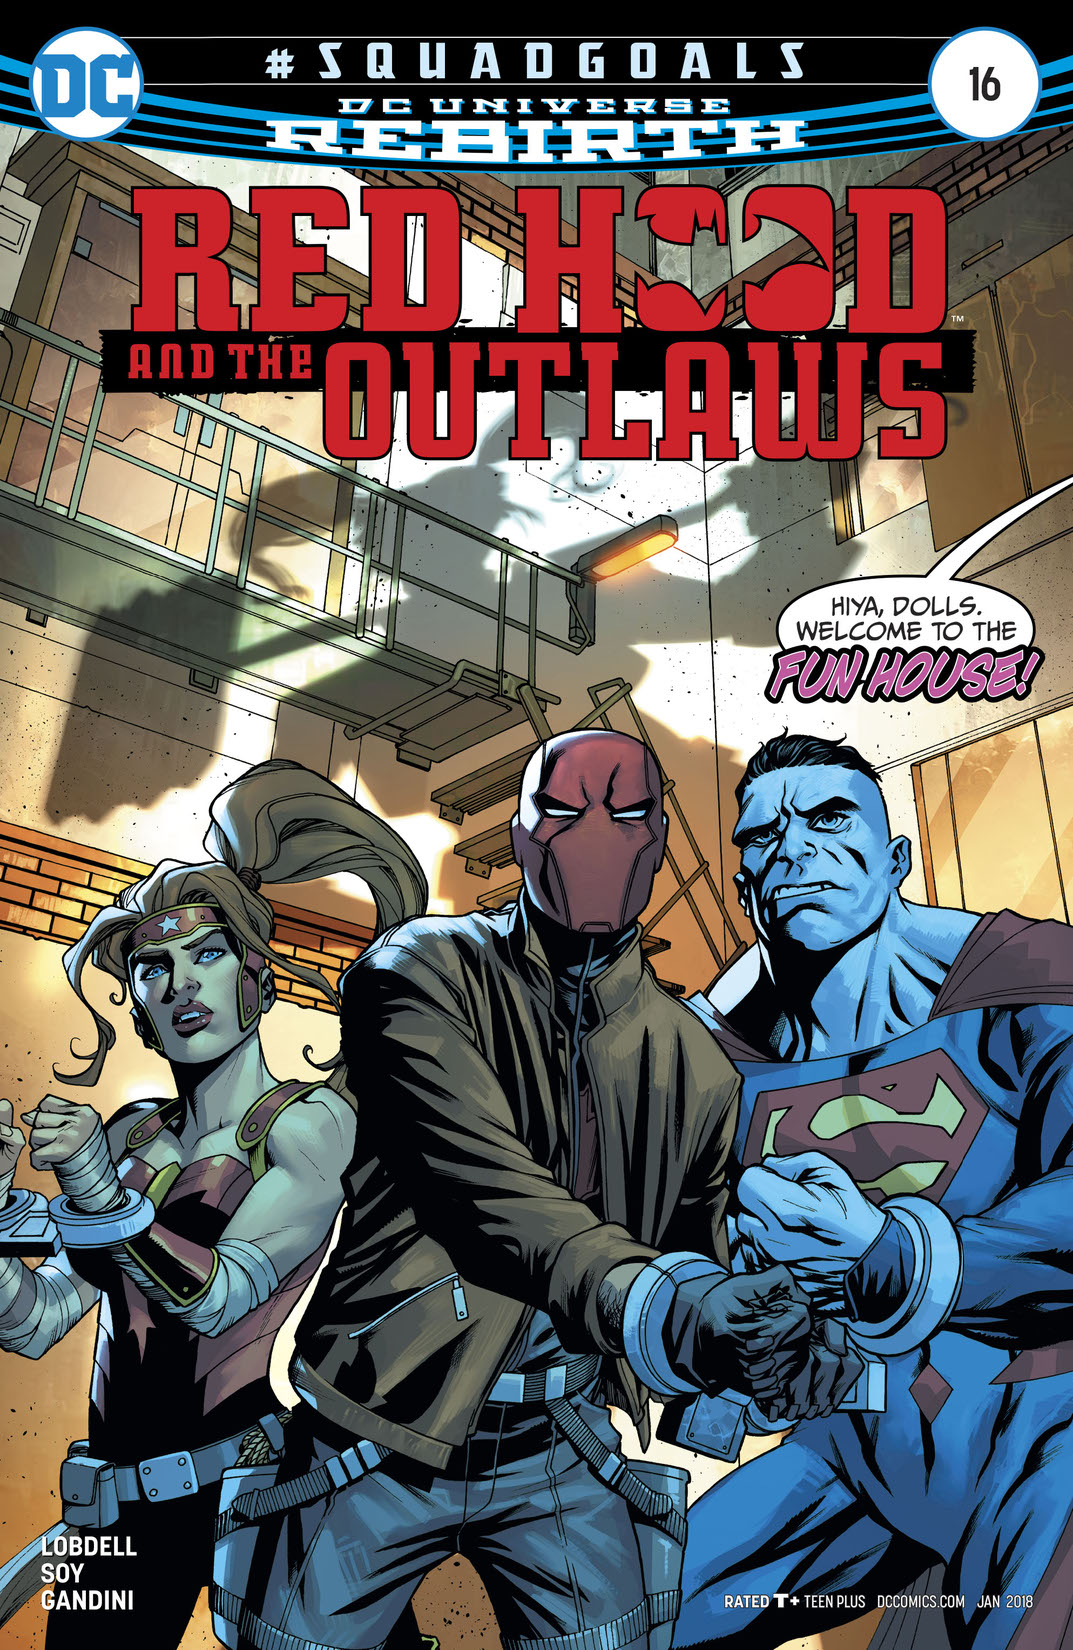 Red Hood and the Outlaws (2016-) #16 preview images